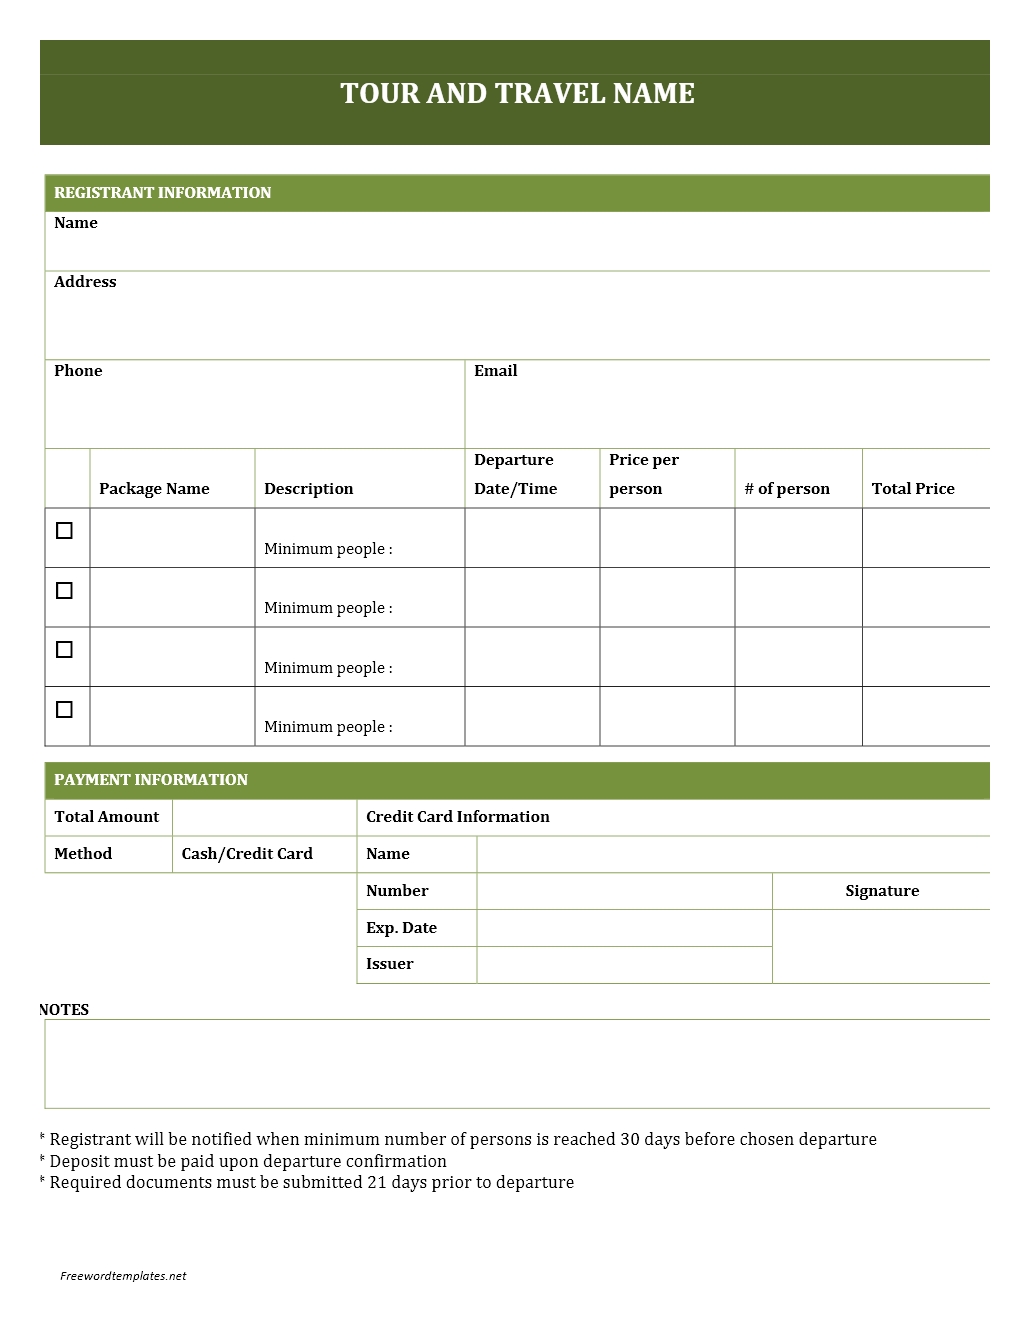 Tour and Travel Booking Form Template